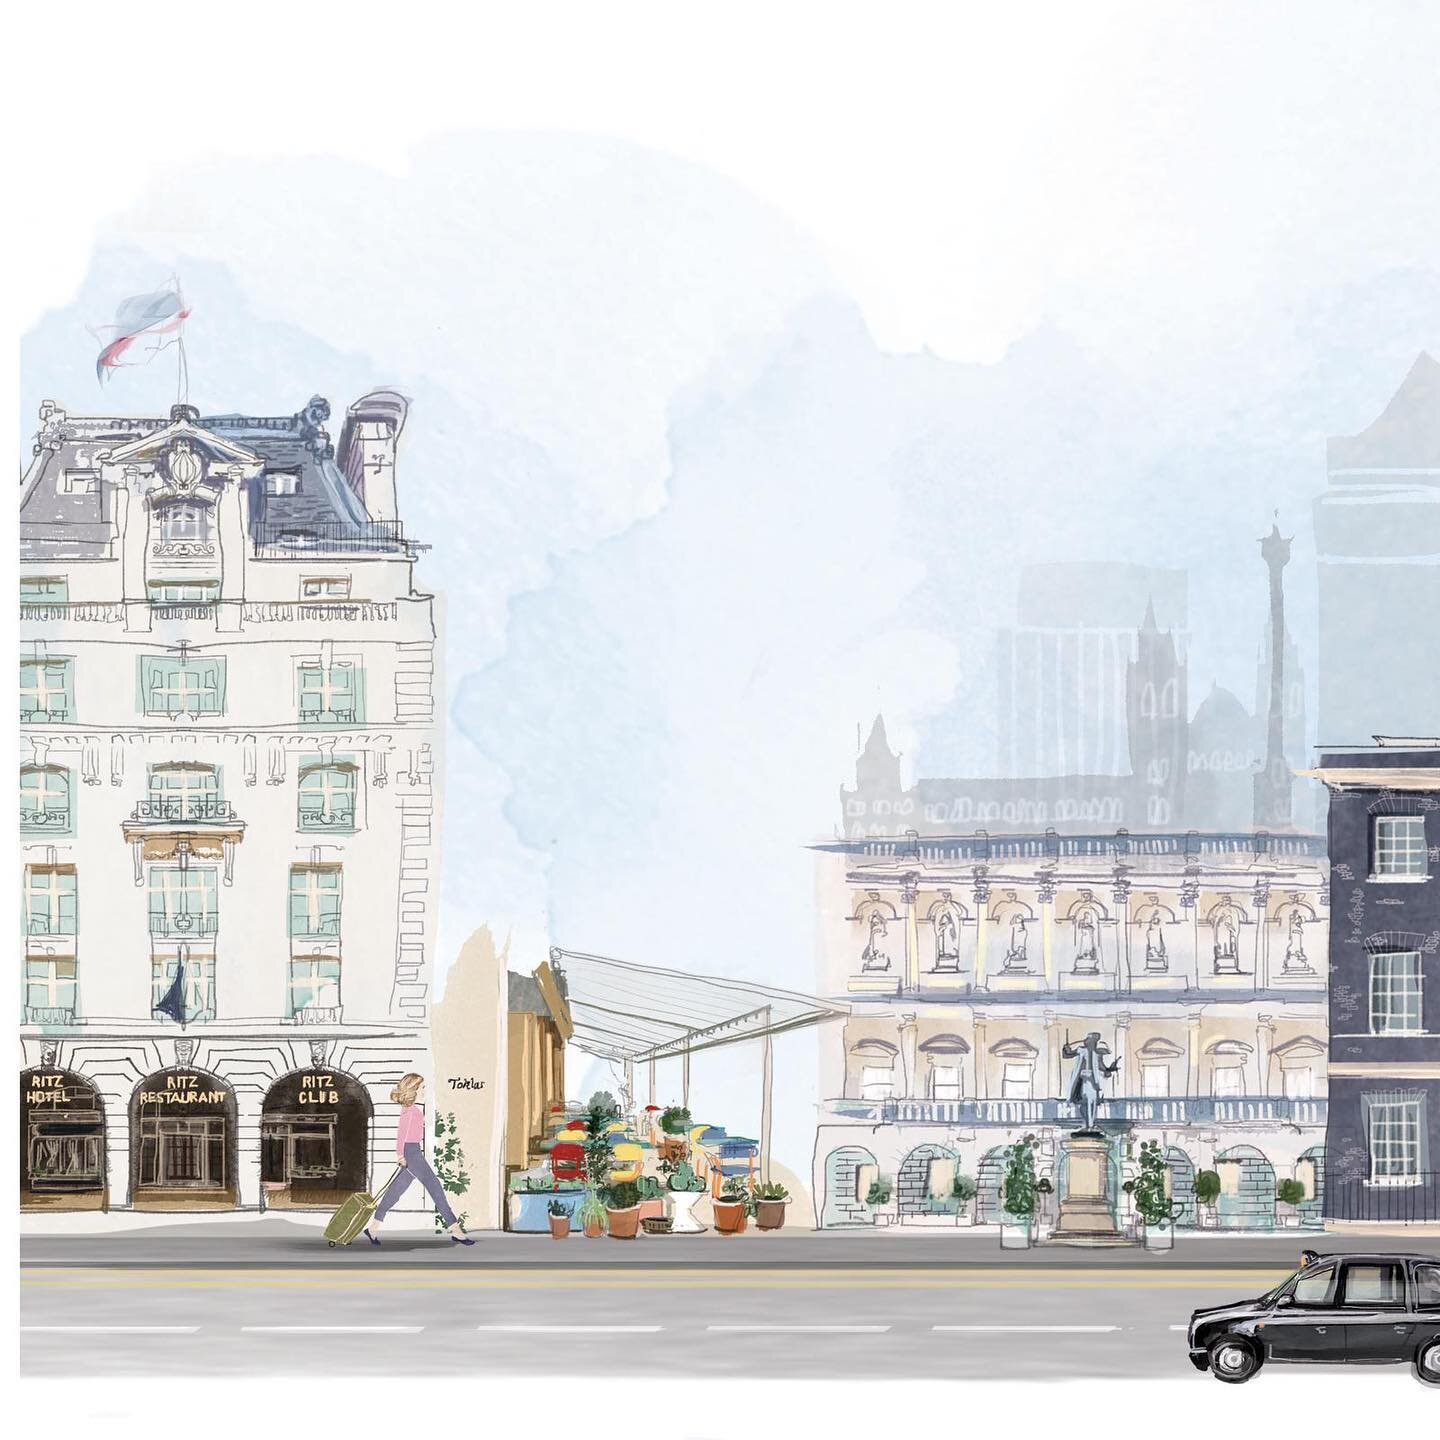 Falling in love with London all over again with this commission for @countrylifemagazine @emilyrose_anderson 🫶

Seeing the city through the eyes and words of @jo_rodgers I loved diving deep into the visual details of her long weekend recommendations